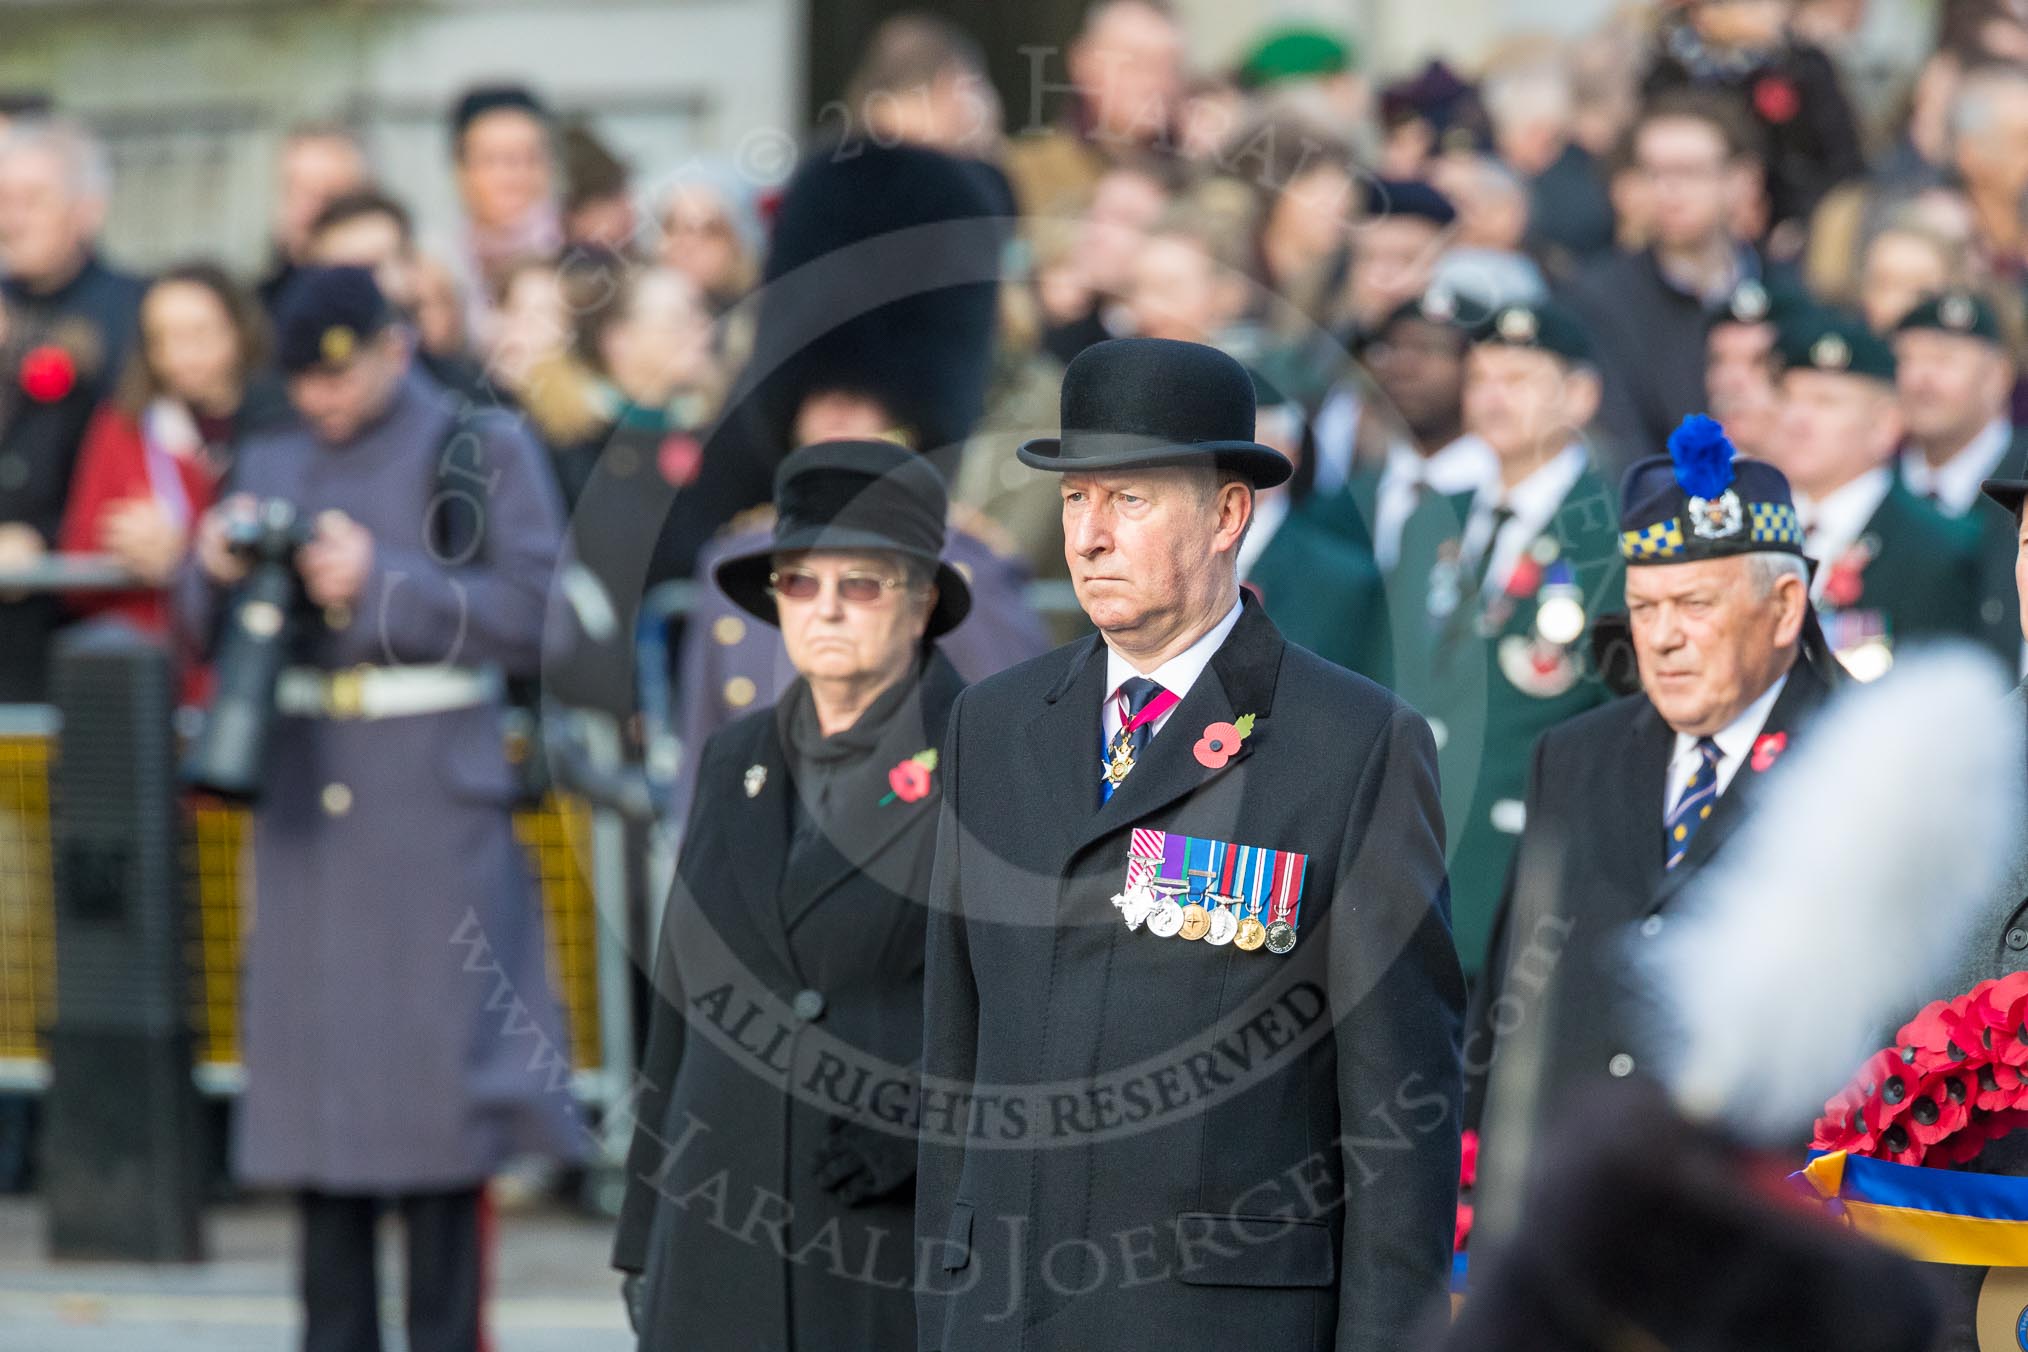 March Past, Remembrance Sunday at the Cenotaph 2016.
Cenotaph, Whitehall, London SW1,
London,
Greater London,
United Kingdom,
on 13 November 2016 at 12:25, image #327